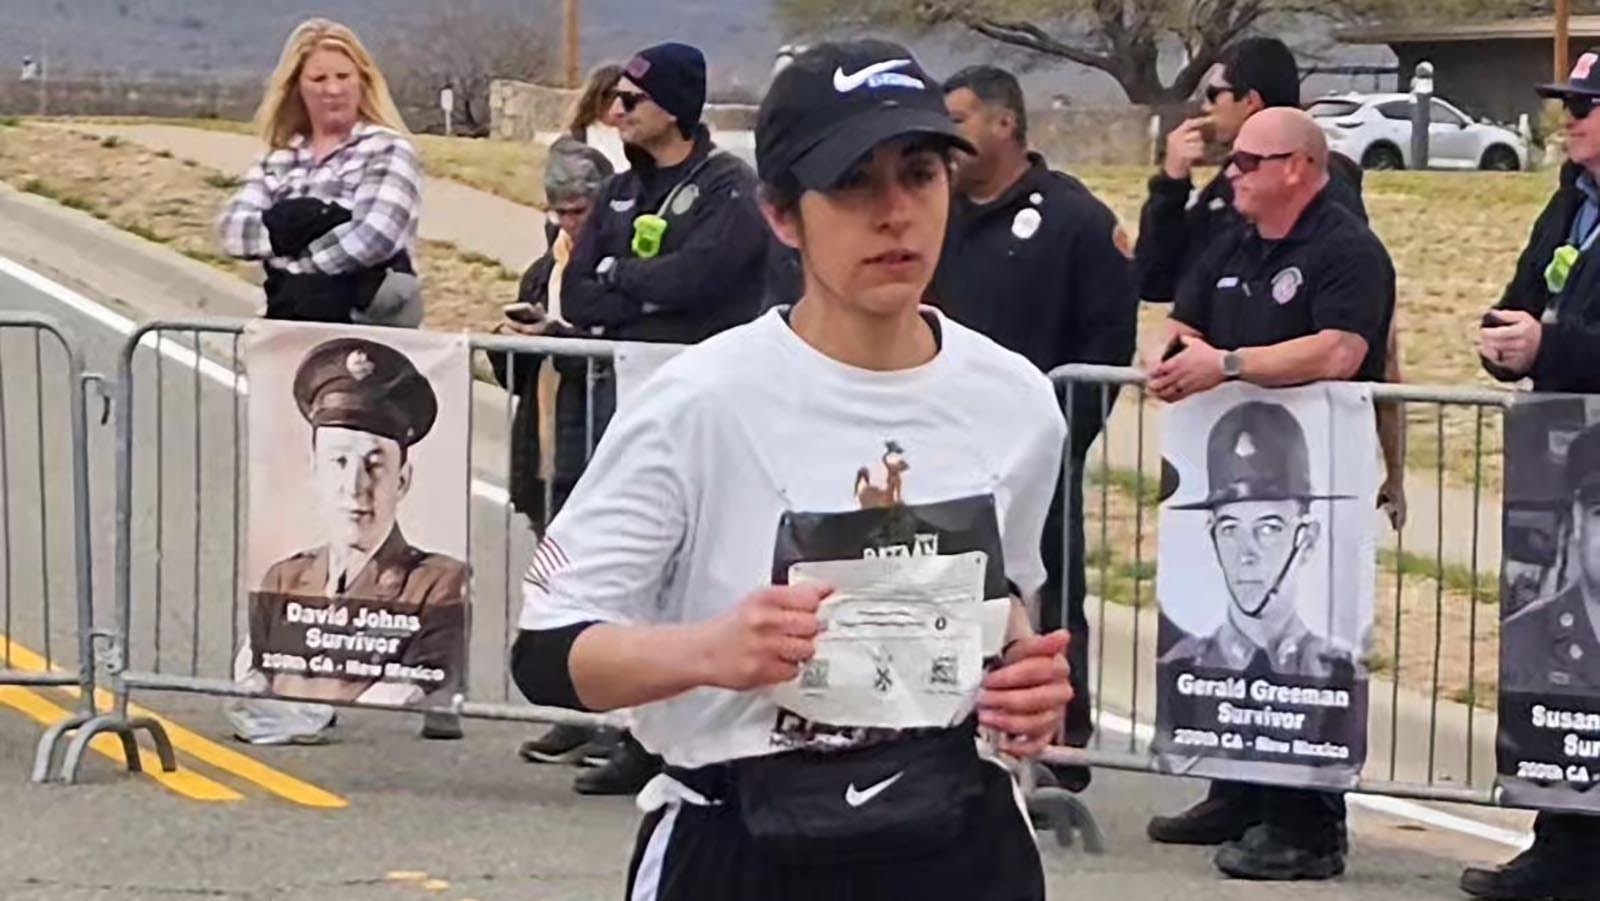 Doctoral student and UW ROTC cadet Bryana Funk took third place in the women's category at the 35th Bataan Memorial Death March in New Mexico on March 16.